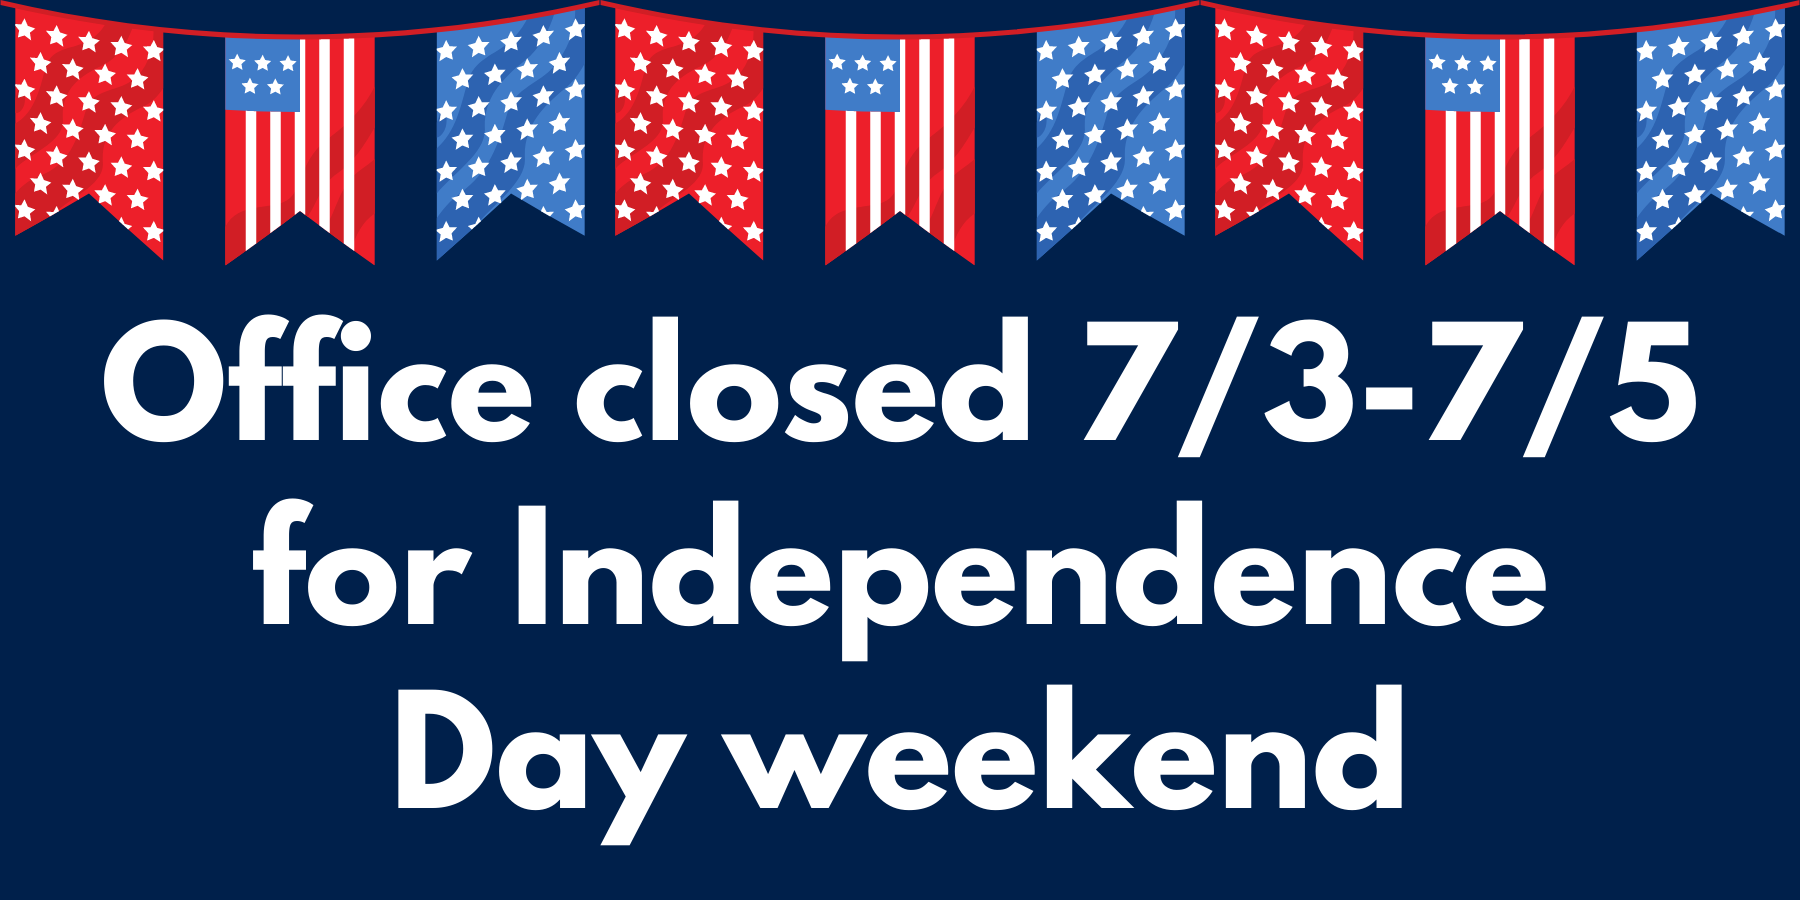 Office closed 73-75 for Independence Day weekend